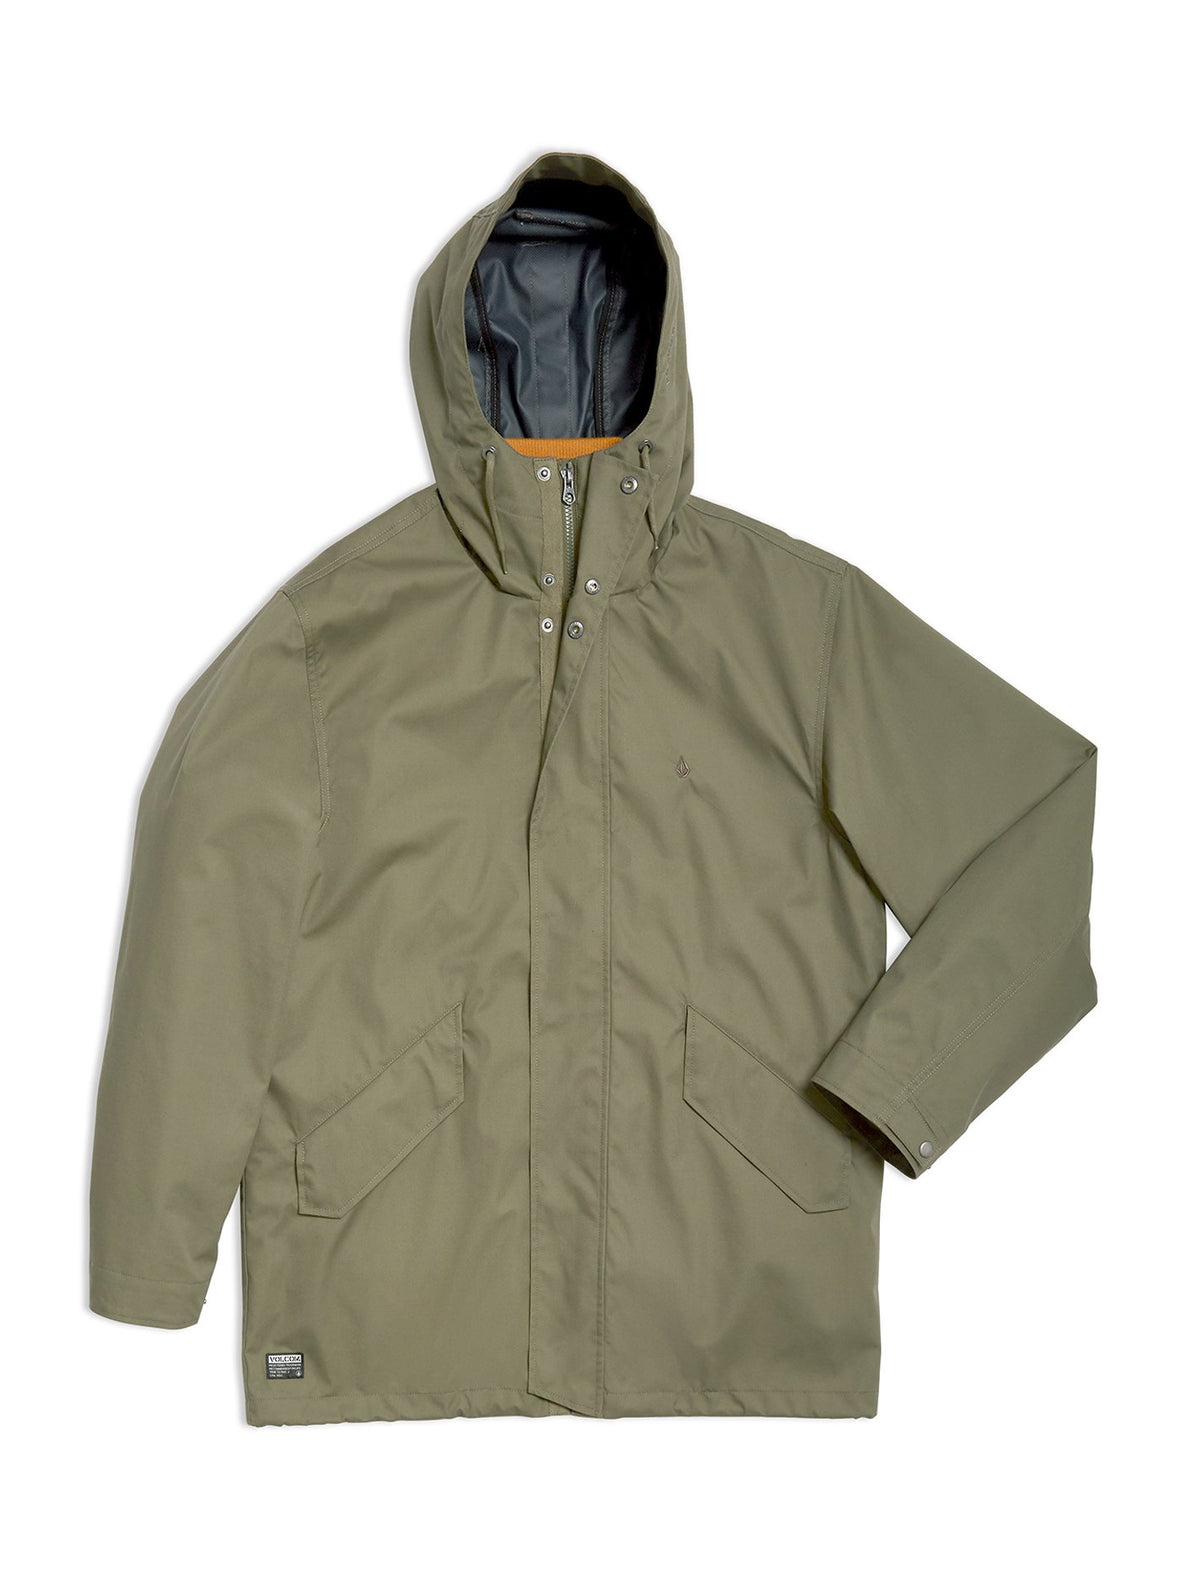 Shadowplay 5K 3In1 Jacket - ARMY GREEN COMBO (A1732106_ARC) [30]